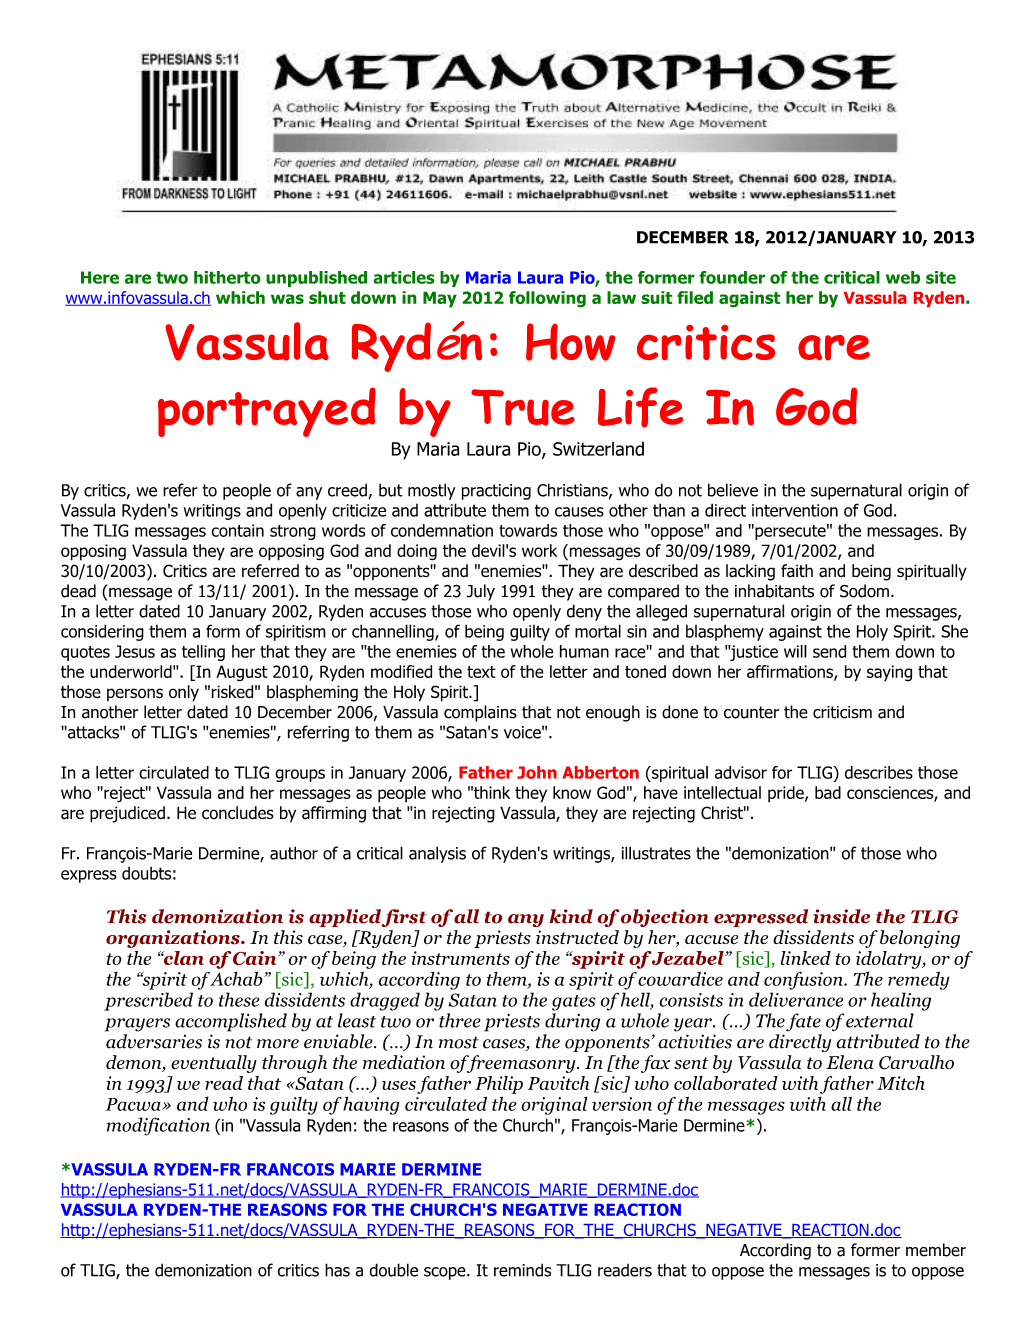 Vassula Rydé N: How Critics Are Portrayed by True Life in God